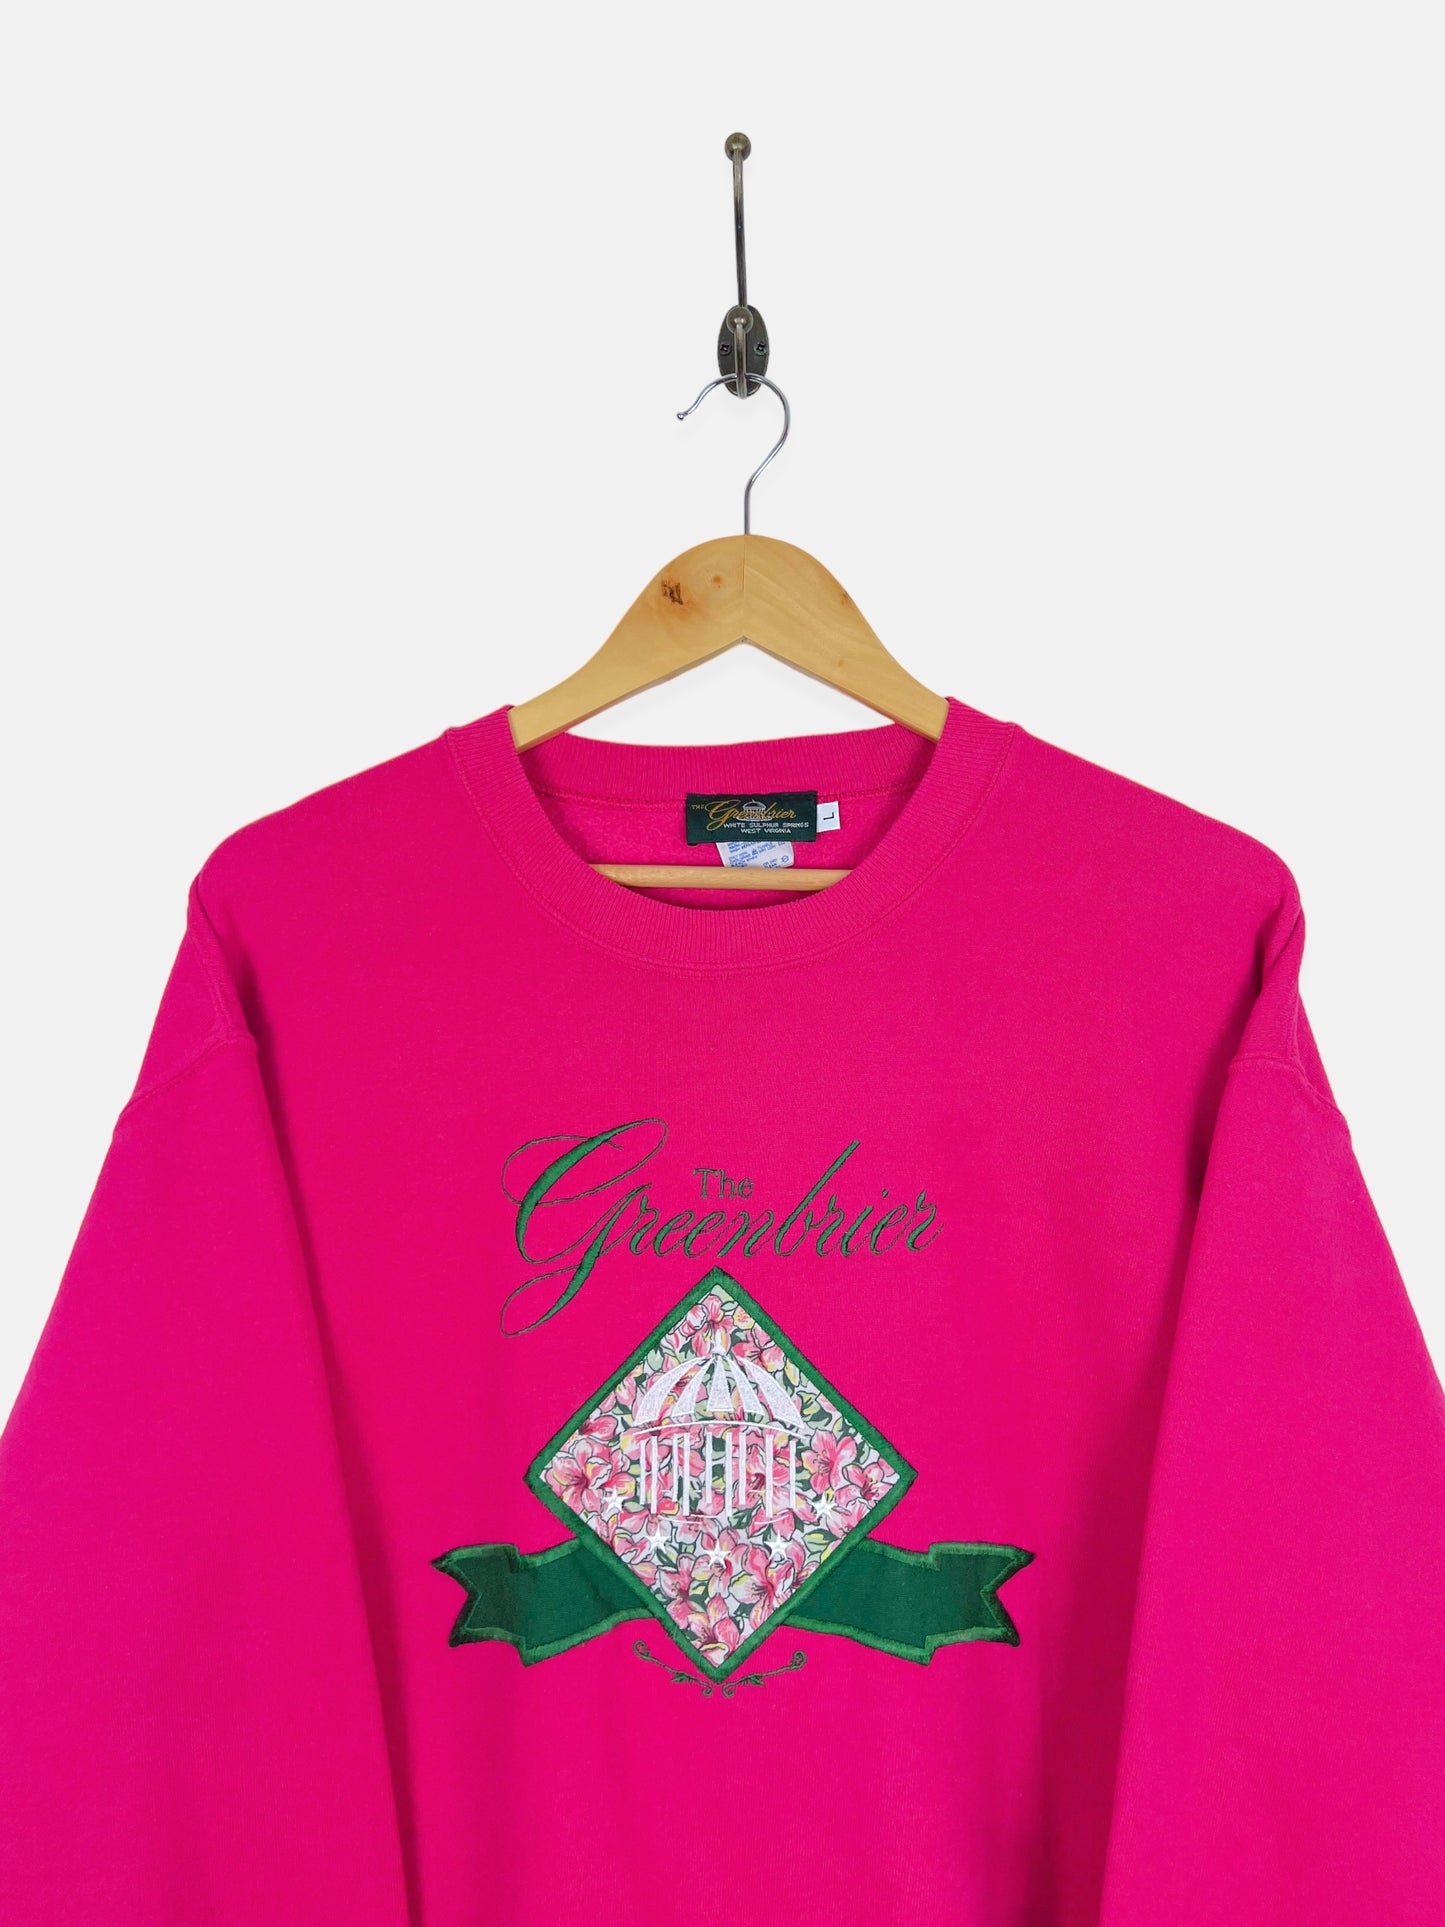 90's The Greenbrier USA Made Embroidered Vintage Sweatshirt Size M